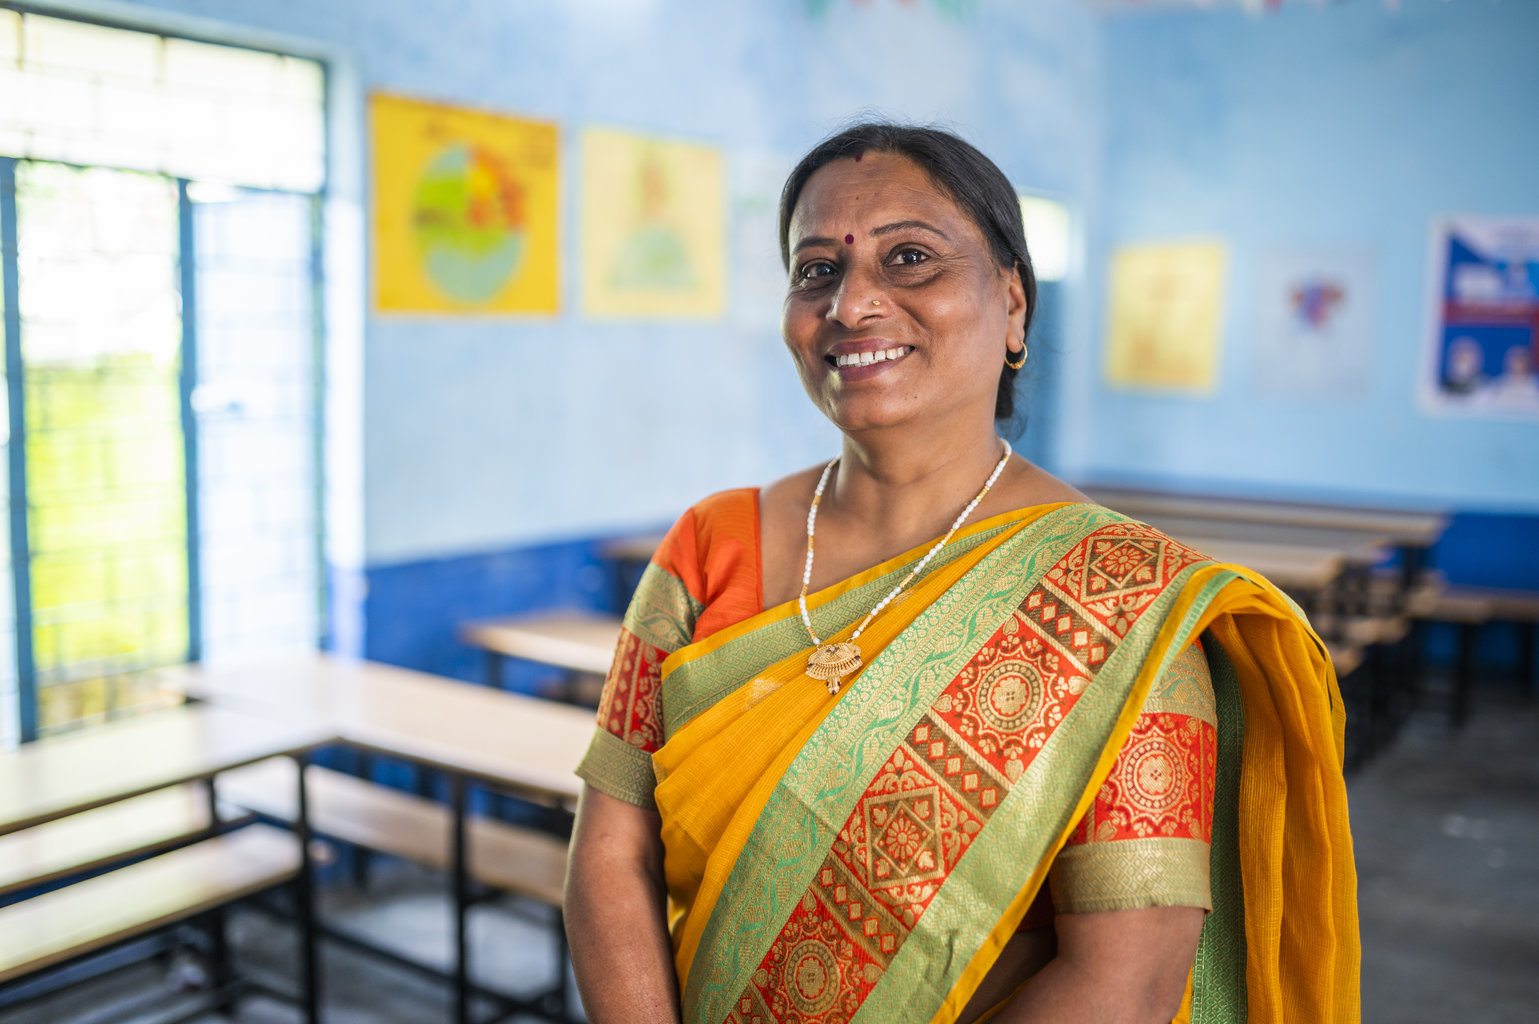 A woman in an orange sari stands smiling 